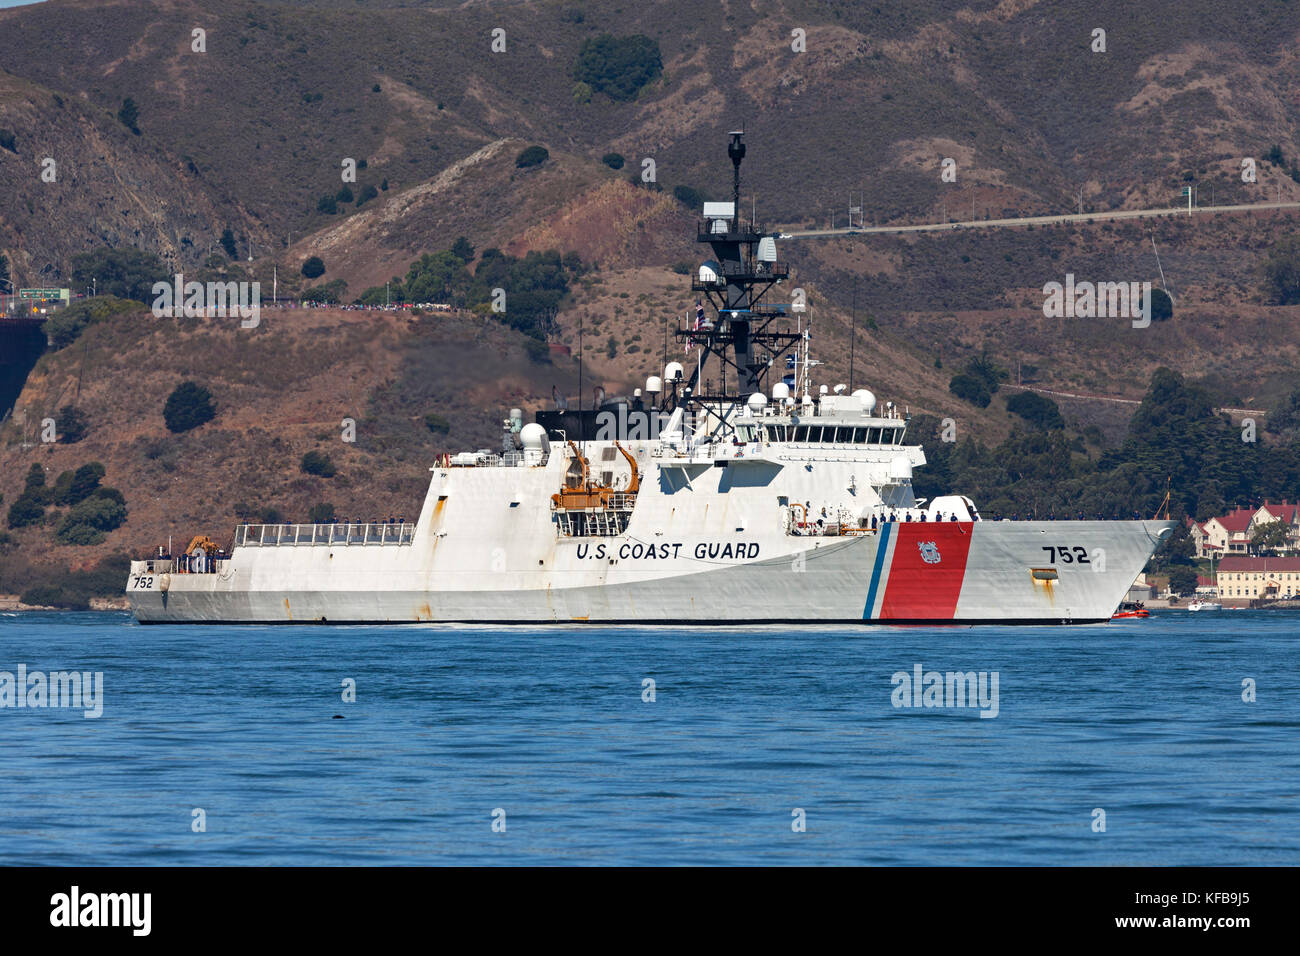 The USCG Legend class cutter Stratton (WMSL 752) on San Francisco Bay. The Stratton is the third of the Legend class cutters. Stock Photo